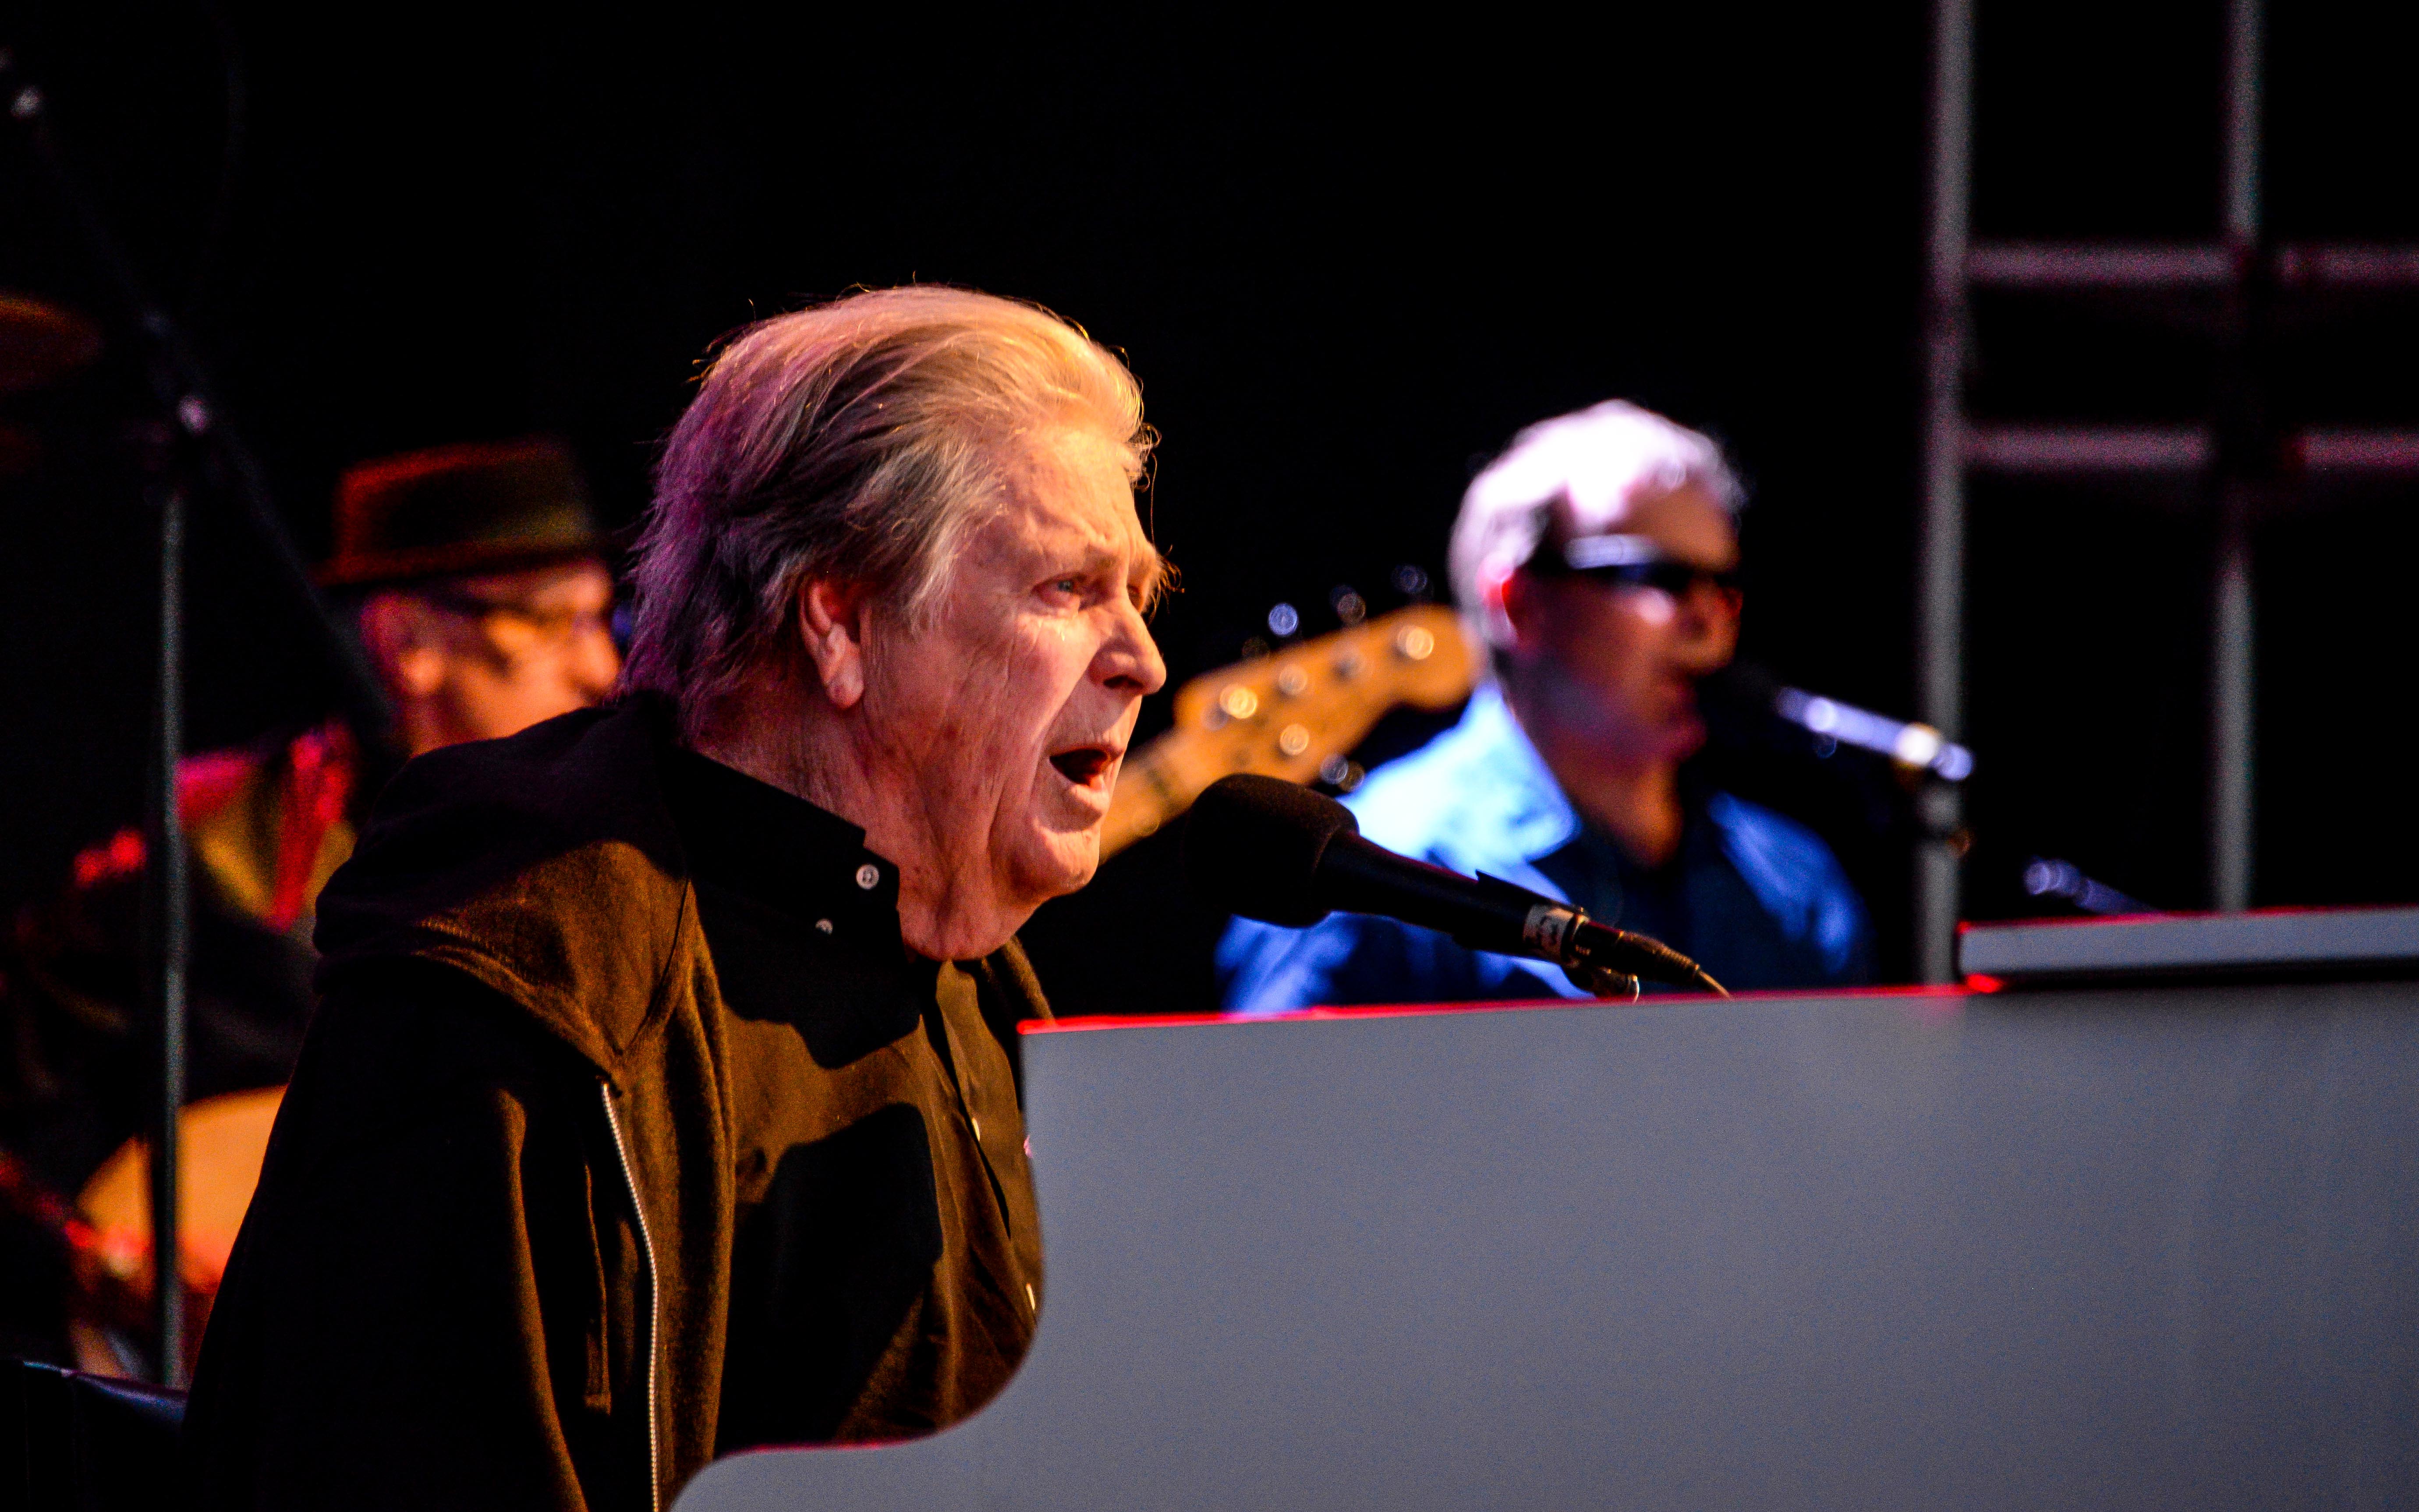 BRIAN WILSON ON TOURING AT 75 & WHERE THE INSPIRATION COMES FROM